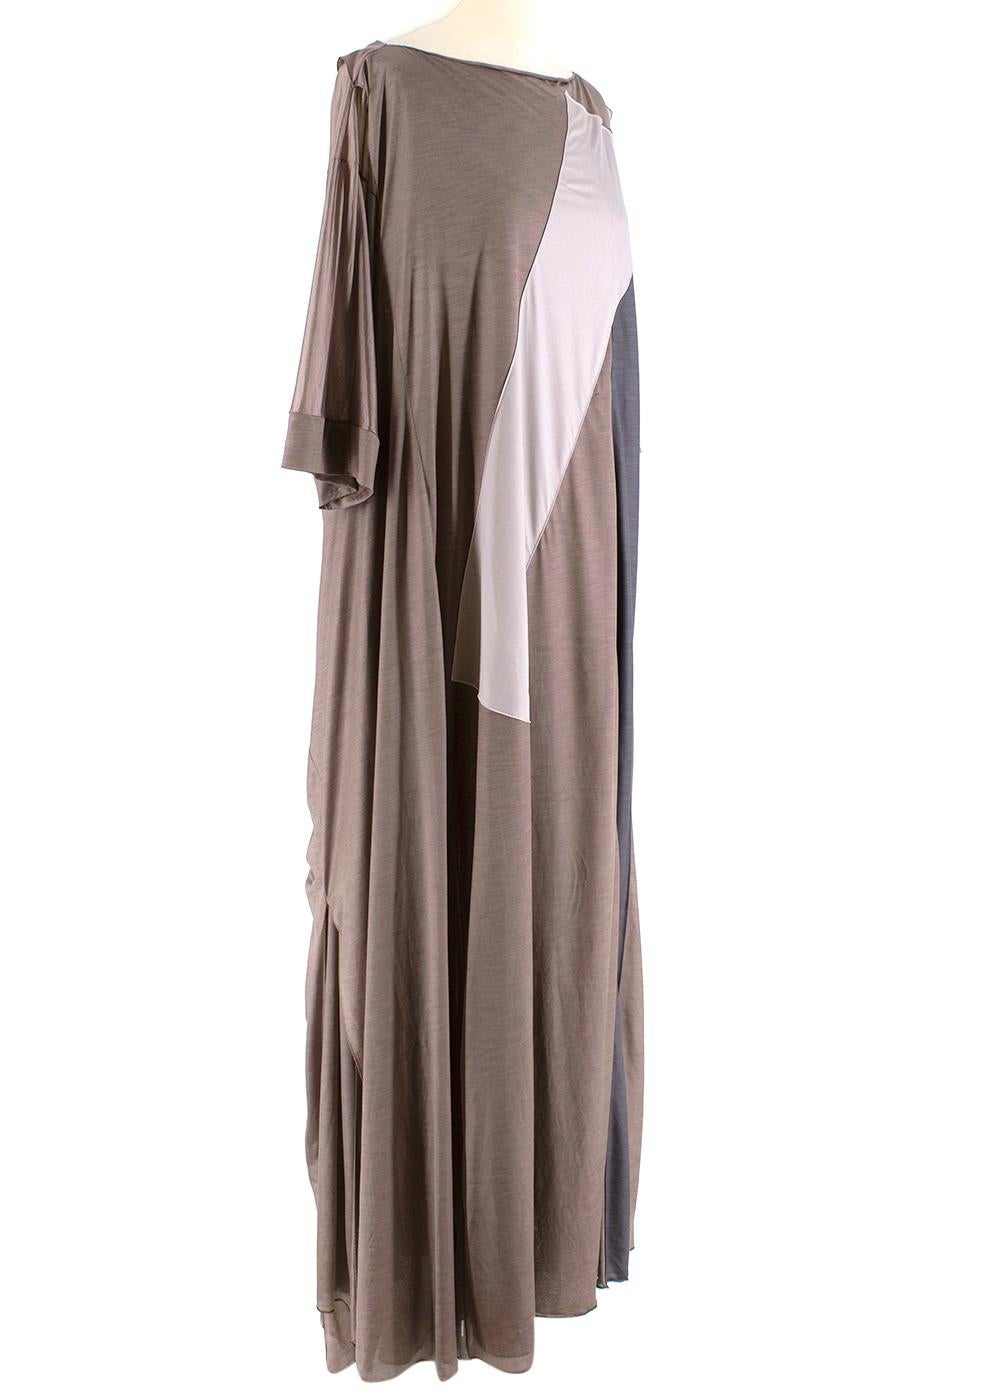 Bottega Veneta Brown Drape Maxi Dress

- Silk feel
- Color blocking
- Quarter sleeves
- Back wrapping detail

Materials:
100% Polyester

Made in Italy

Dry Clean Only
